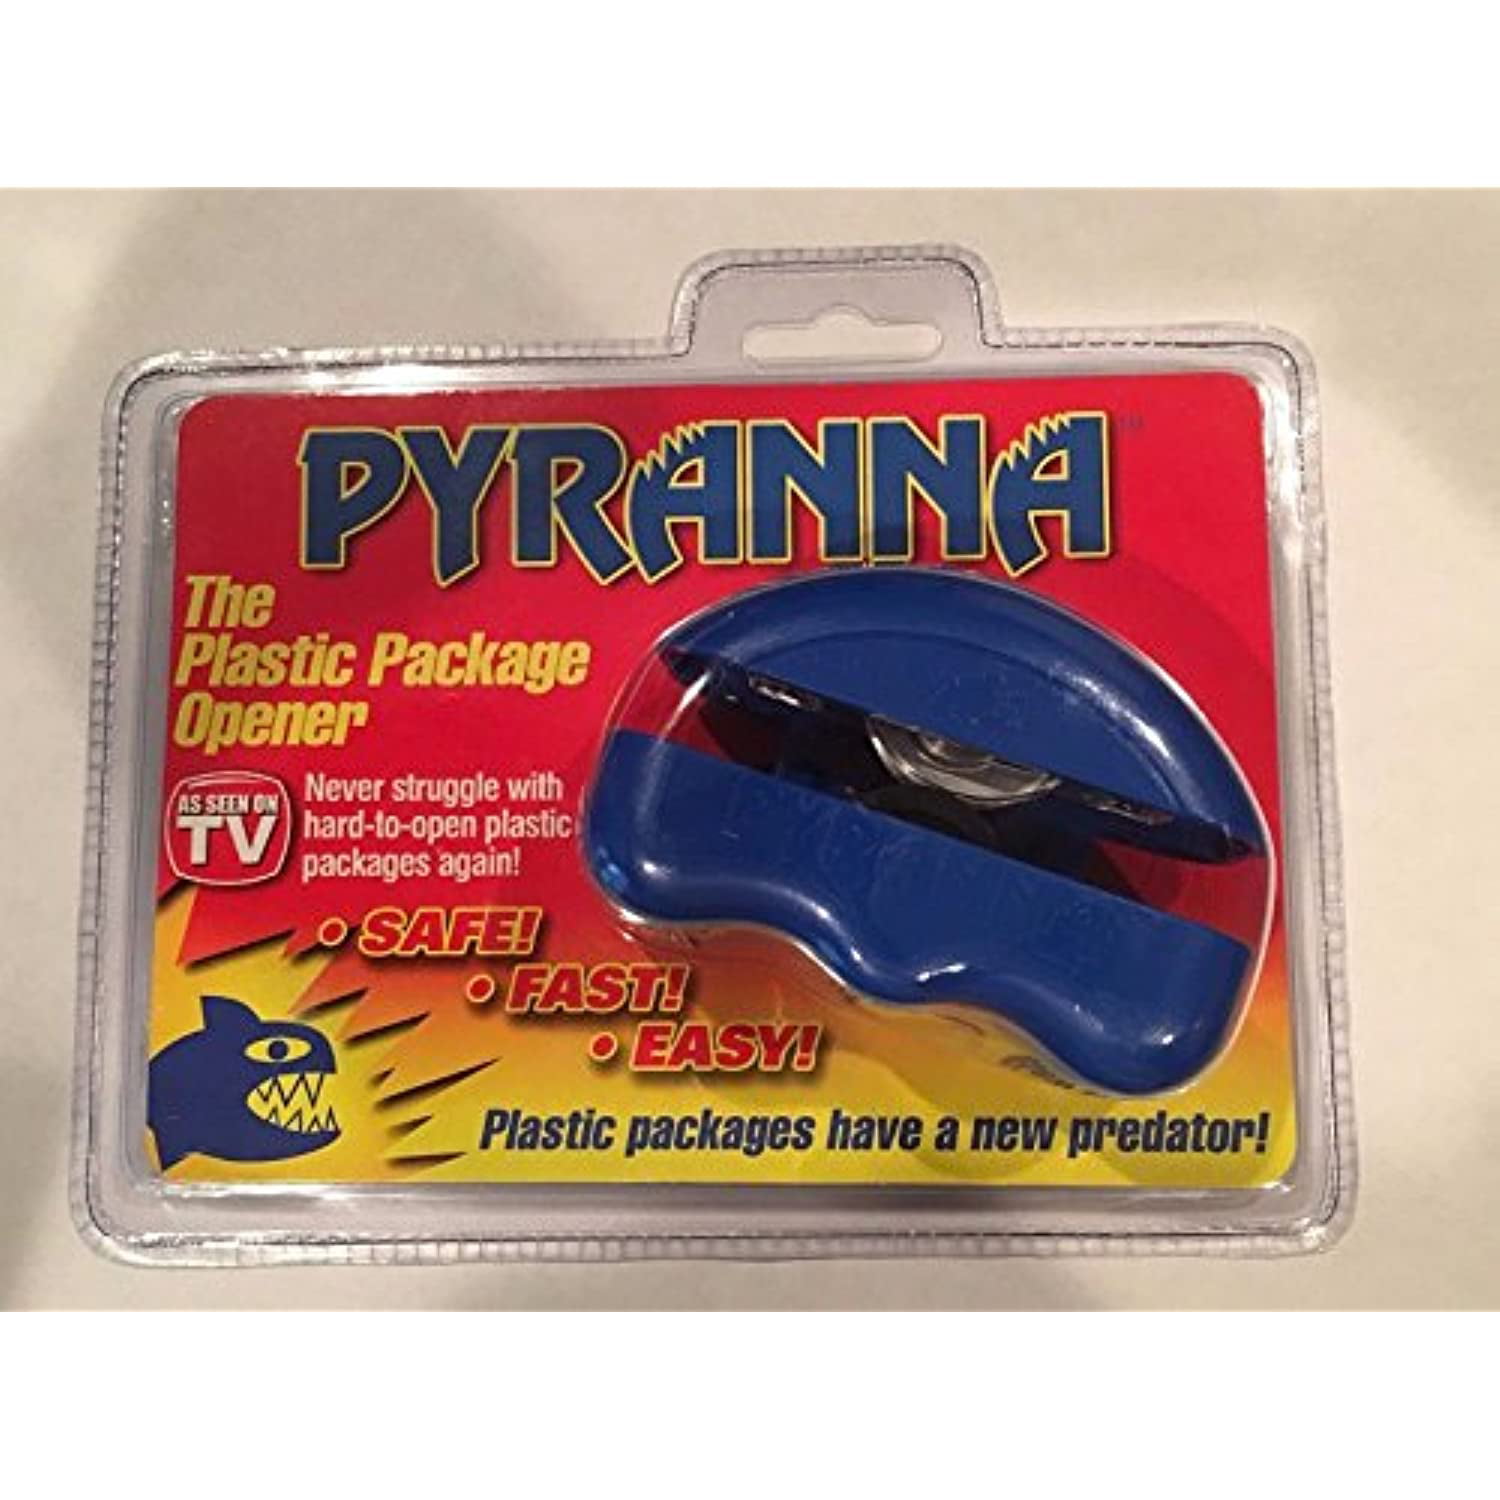 Pyranna Hard Shell Plastic Package Opener As Seen On TV New in